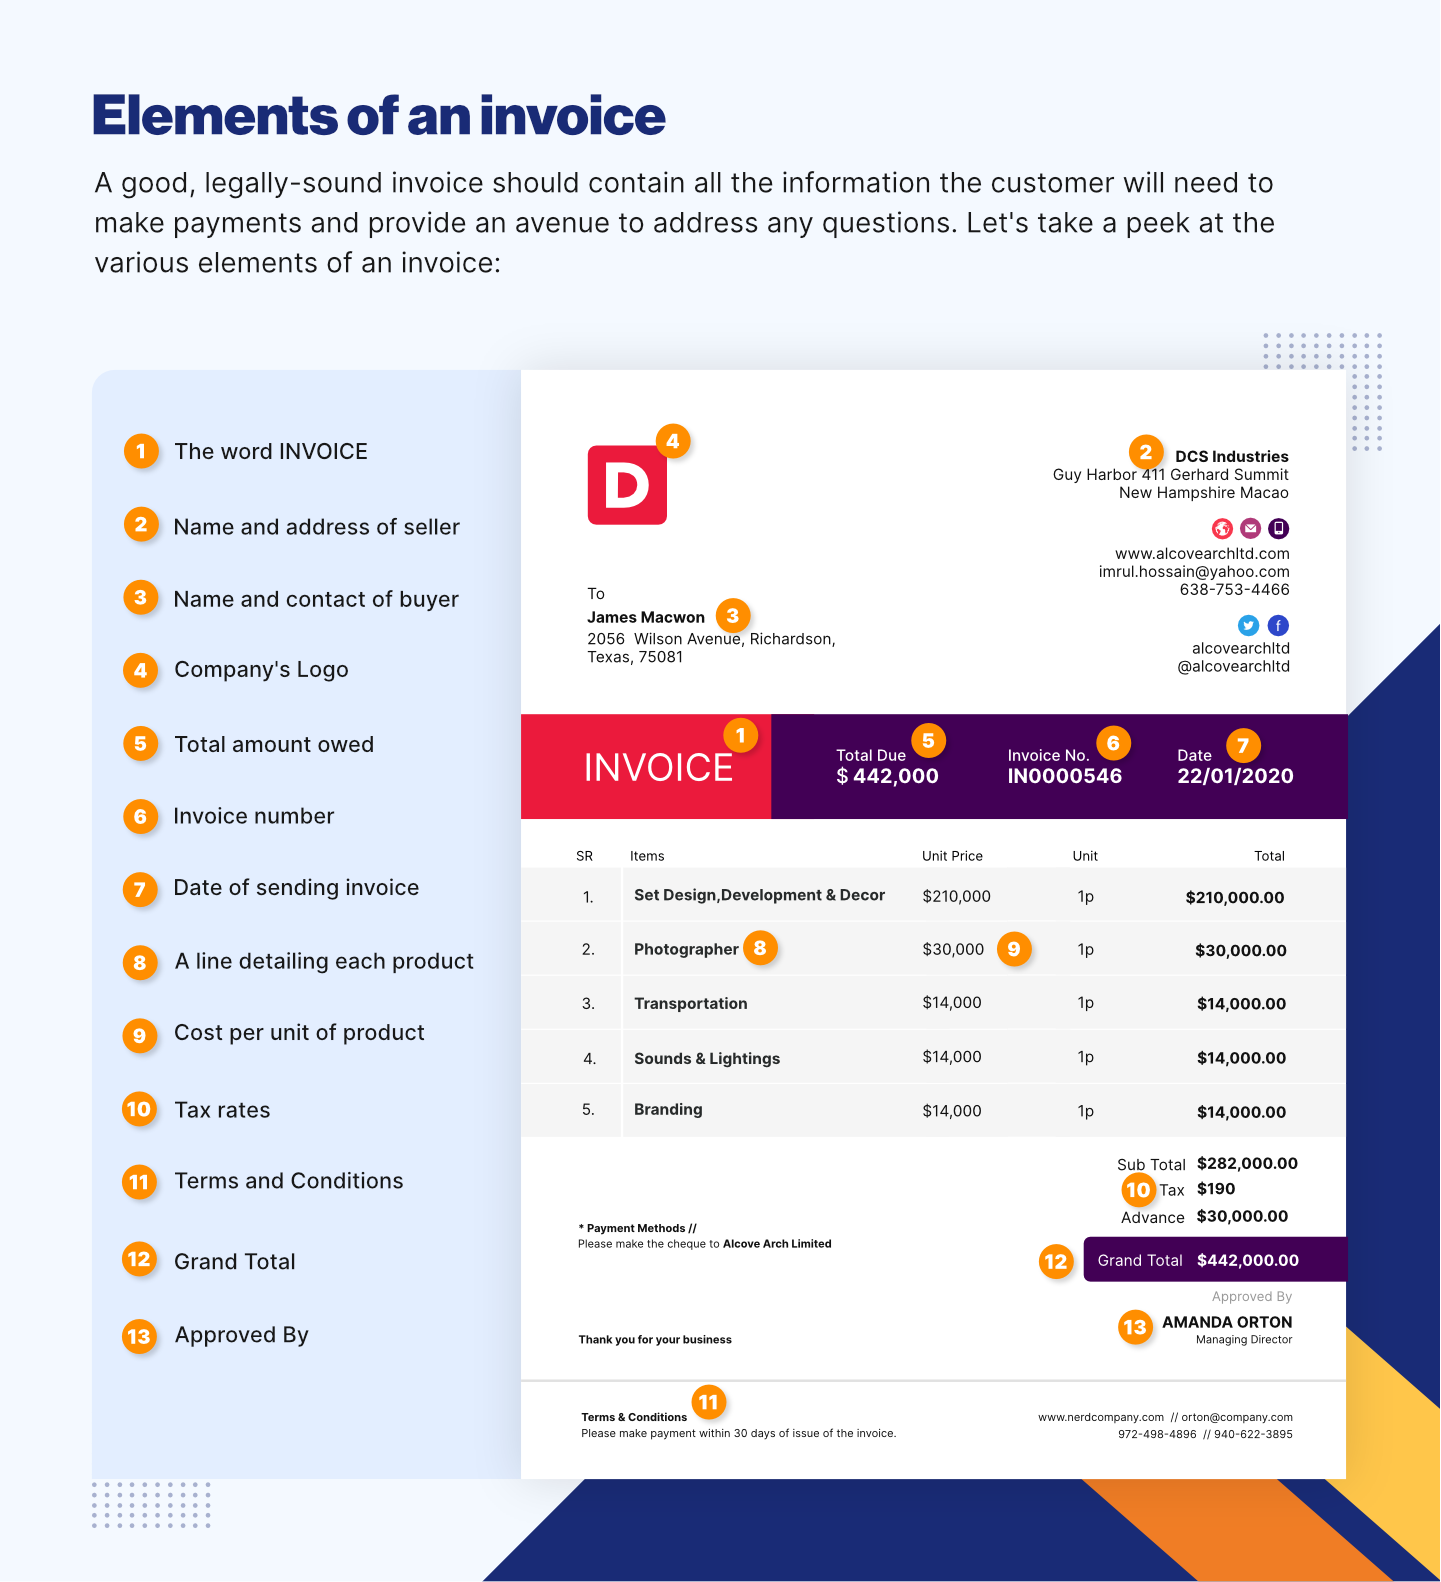 Elements of an Invoice